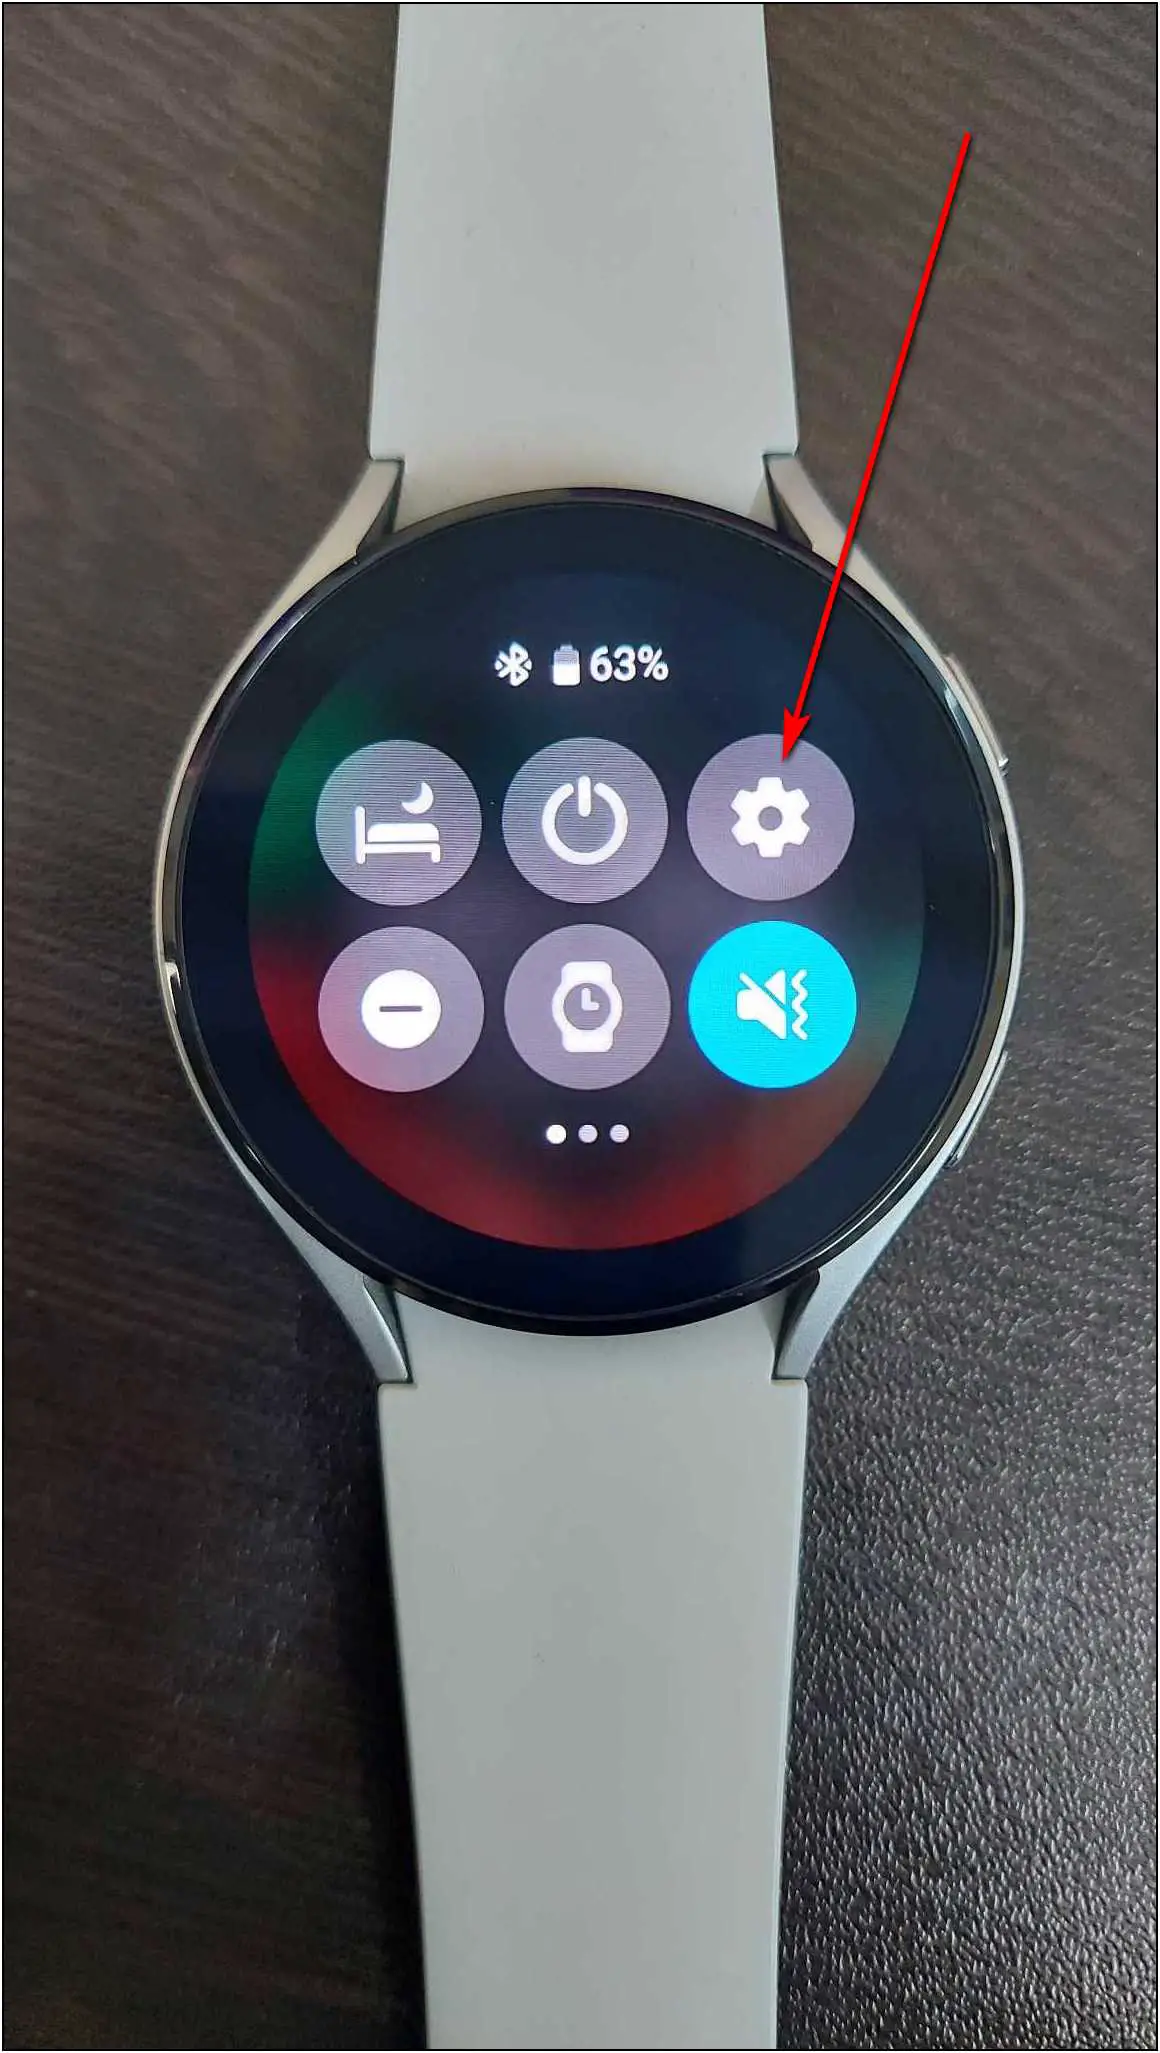 Turn Off Connectivity to Save Battery Galaxy Watch 4